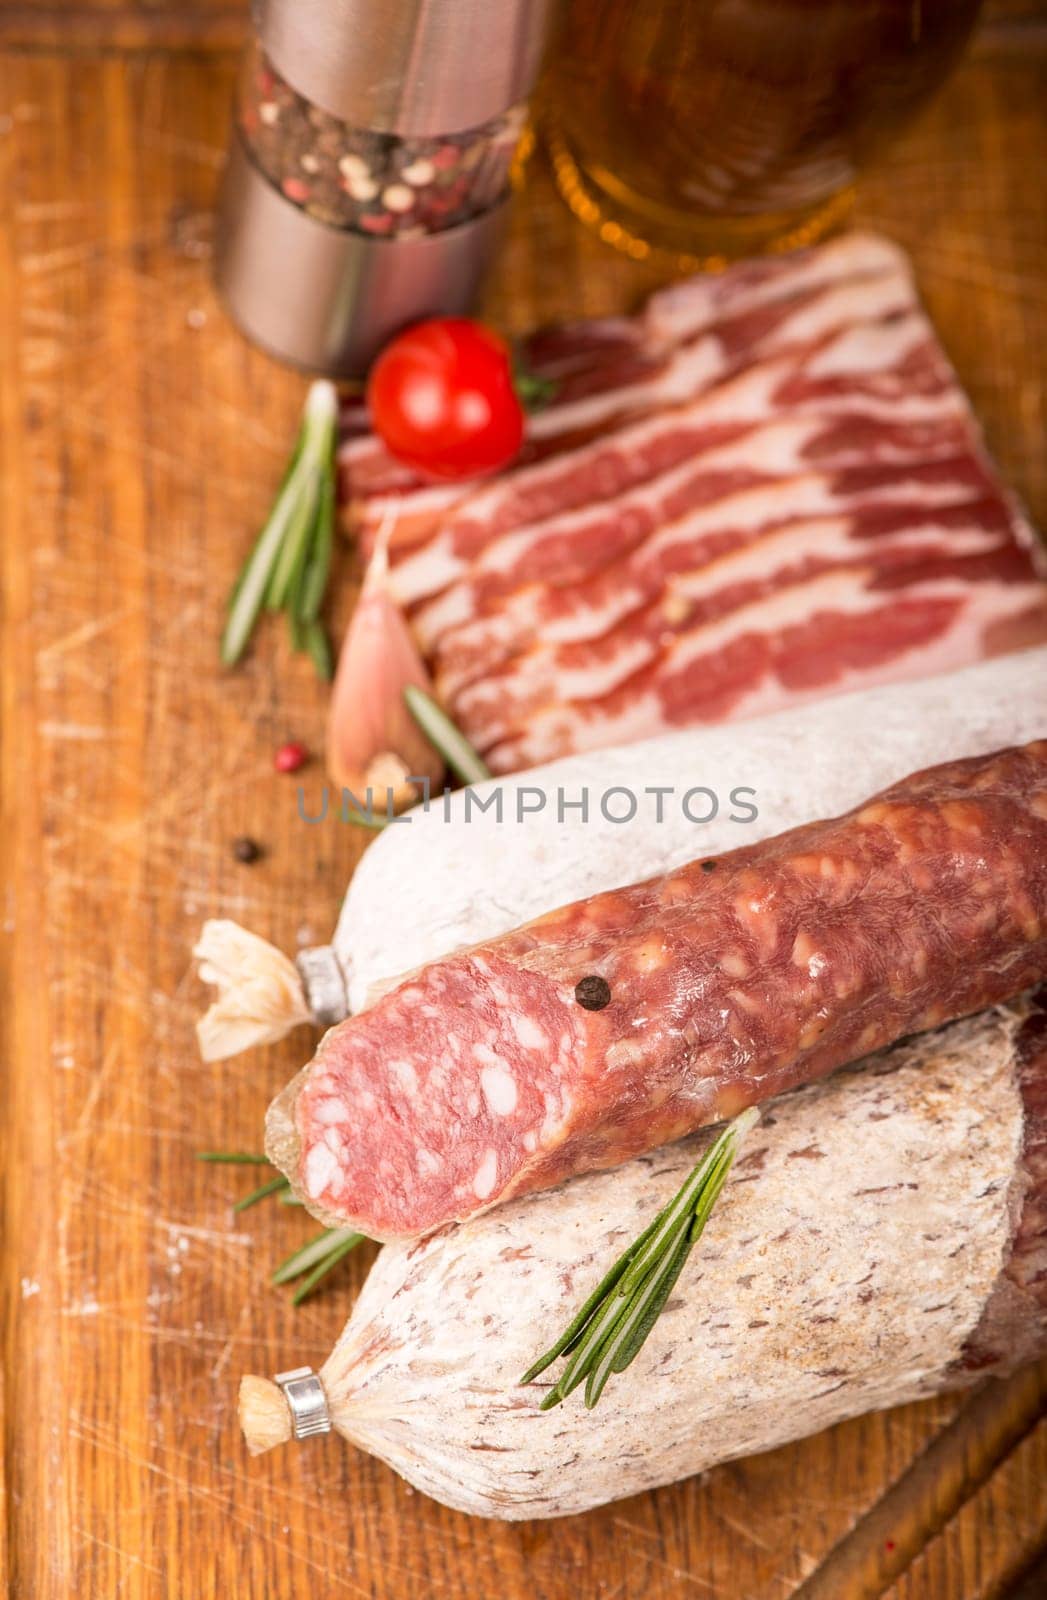 Smoked sausage with rosemary and peppercorns tomatoes and garlic by aprilphoto